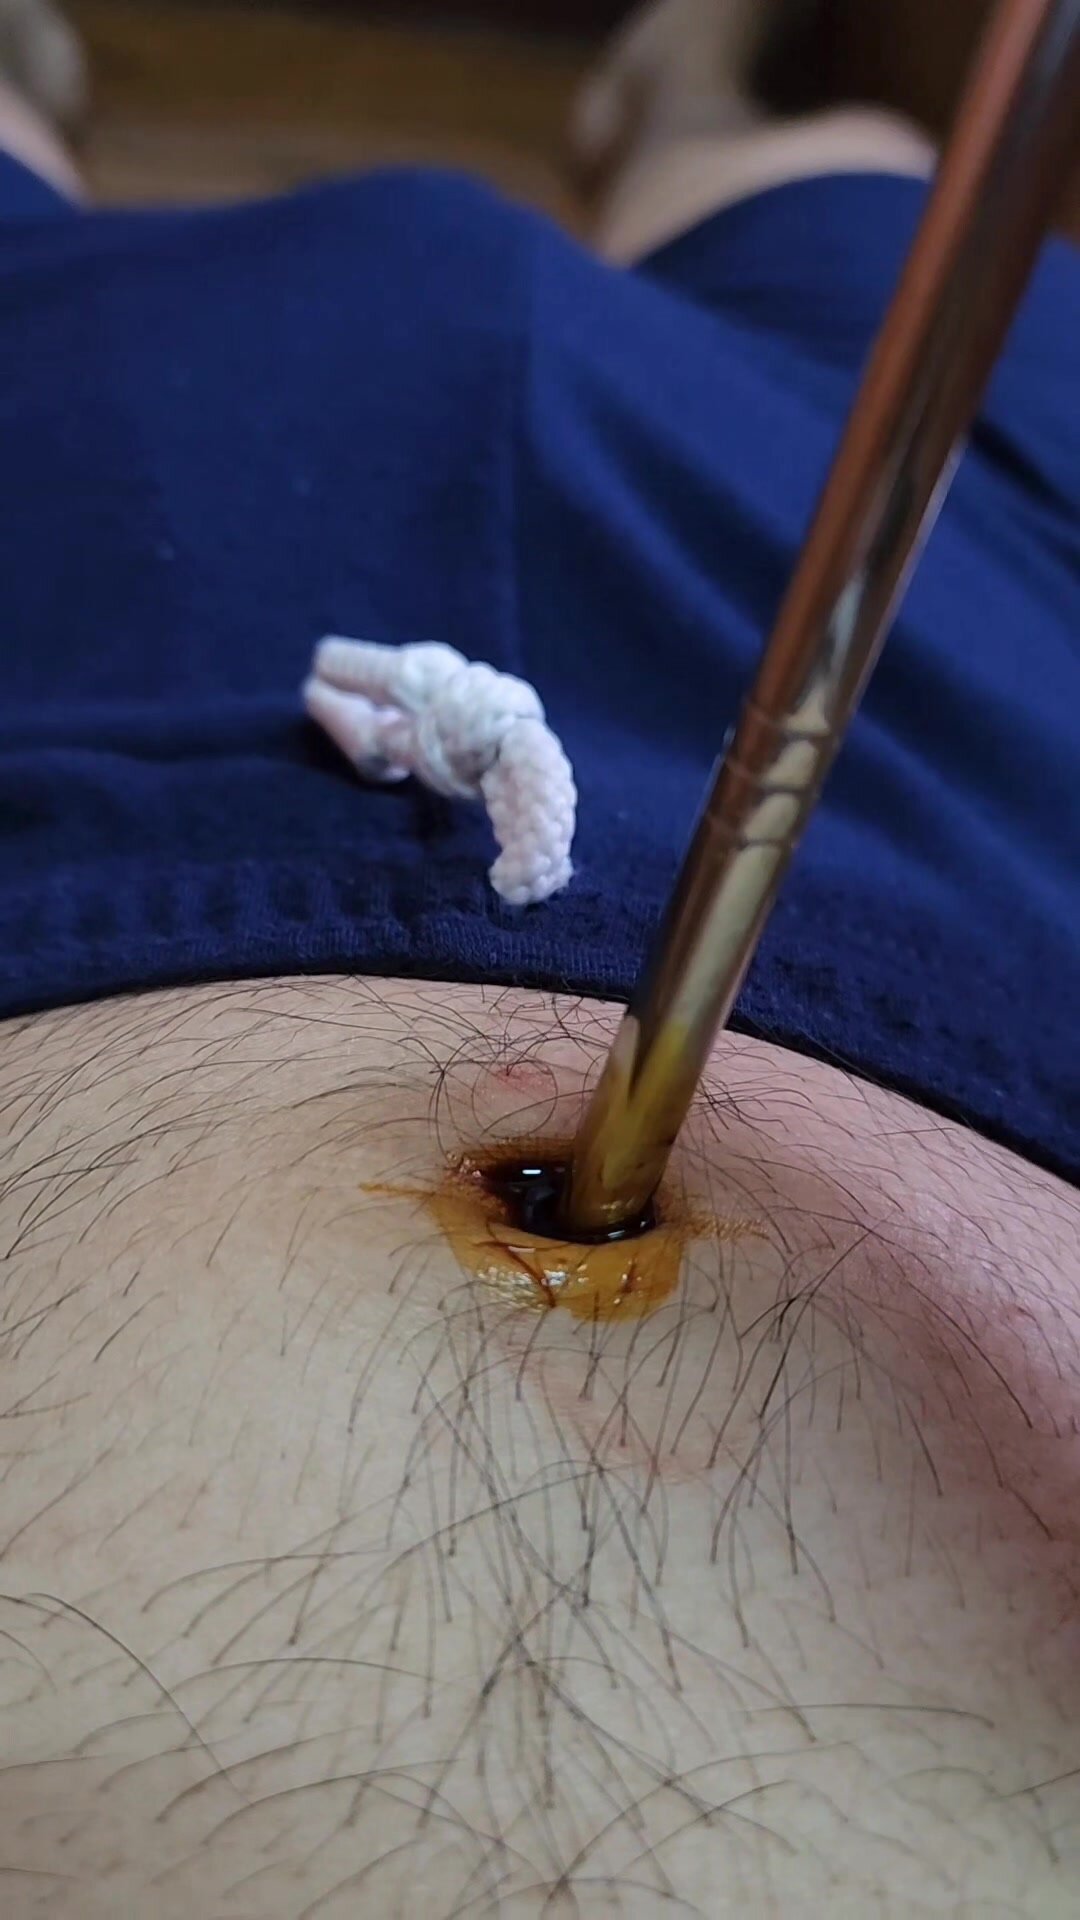 Stab navel repeatedly and clean